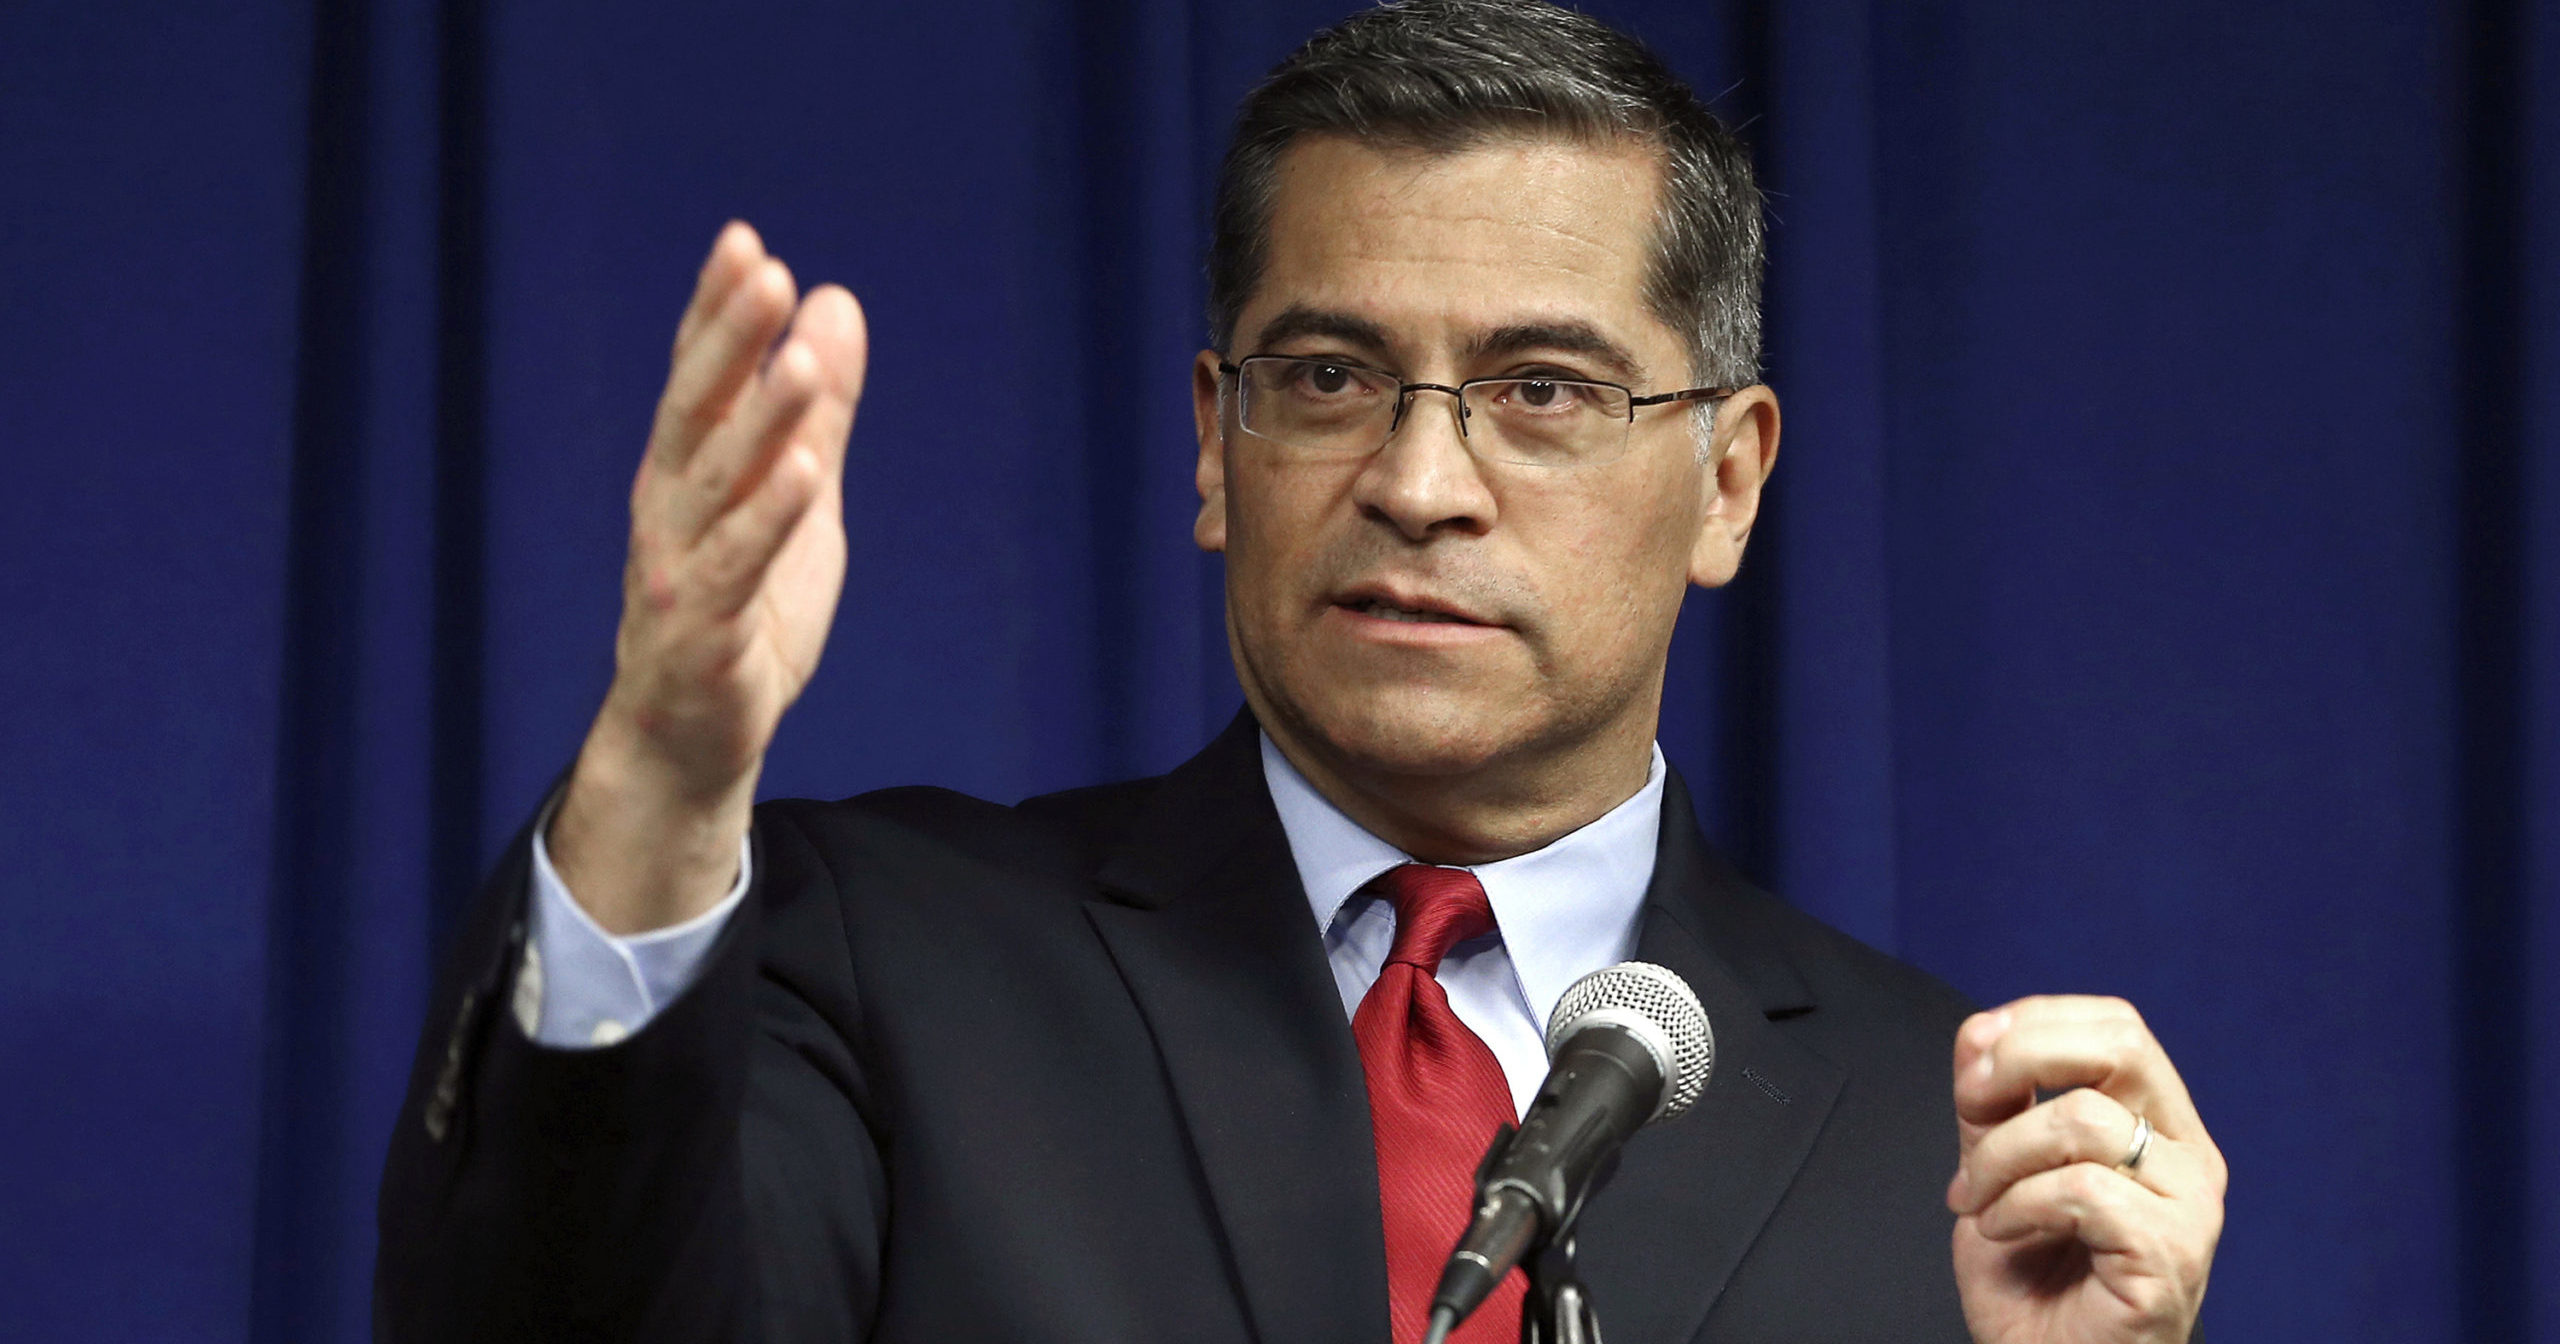 In this March 5, 2019, file photo, California Attorney General Xavier Becerra speaks during a news conference in Sacramento, California.